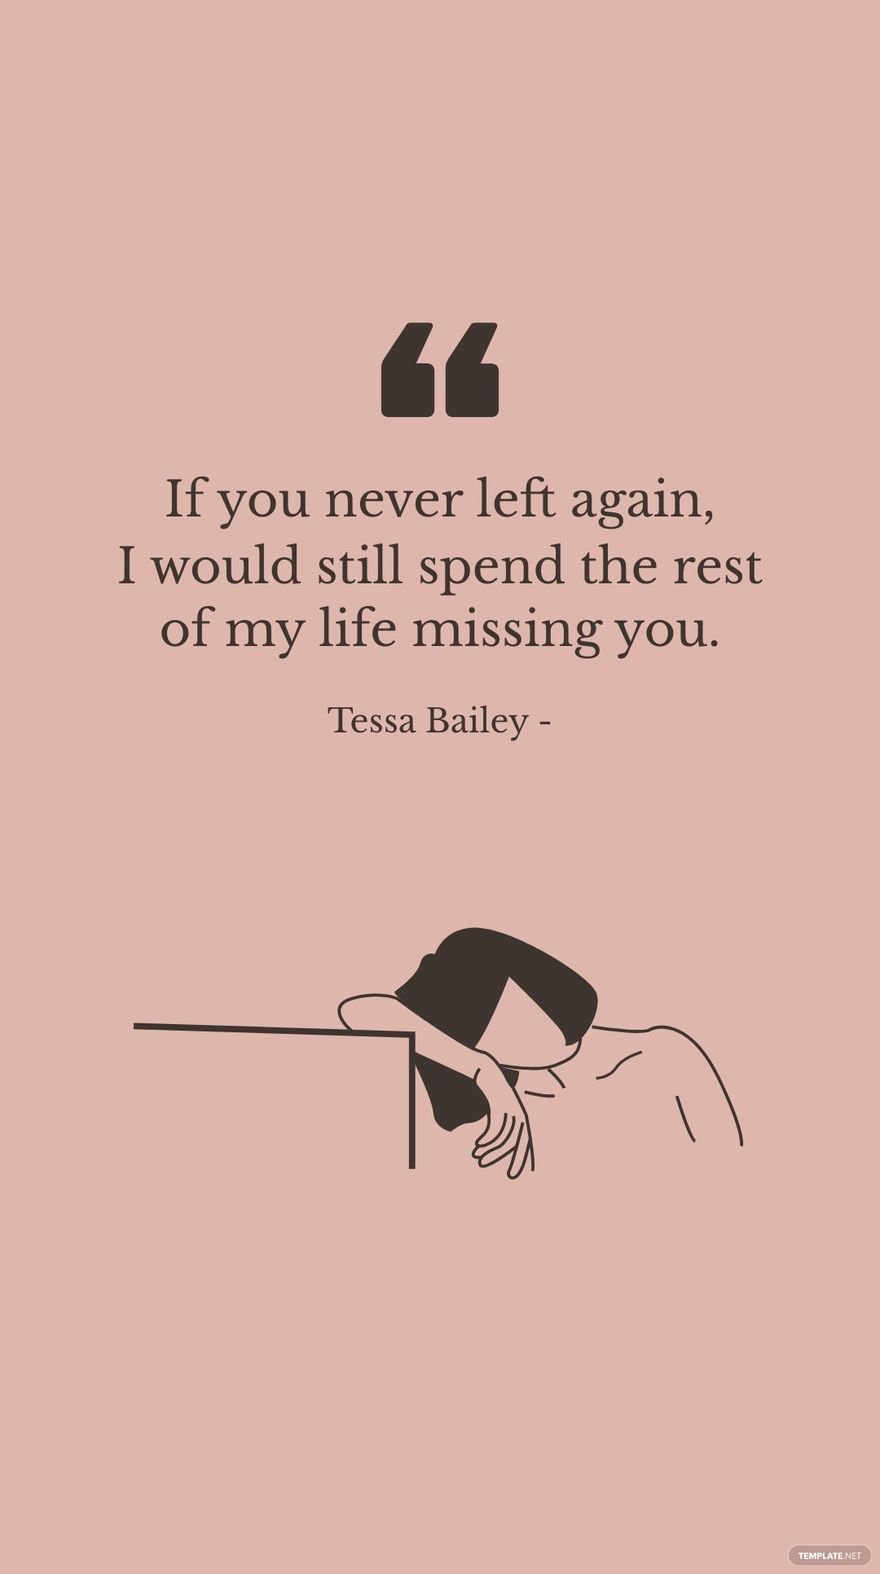 Tessa Bailey - If you never left again, I would still spend the rest of my life missing you.